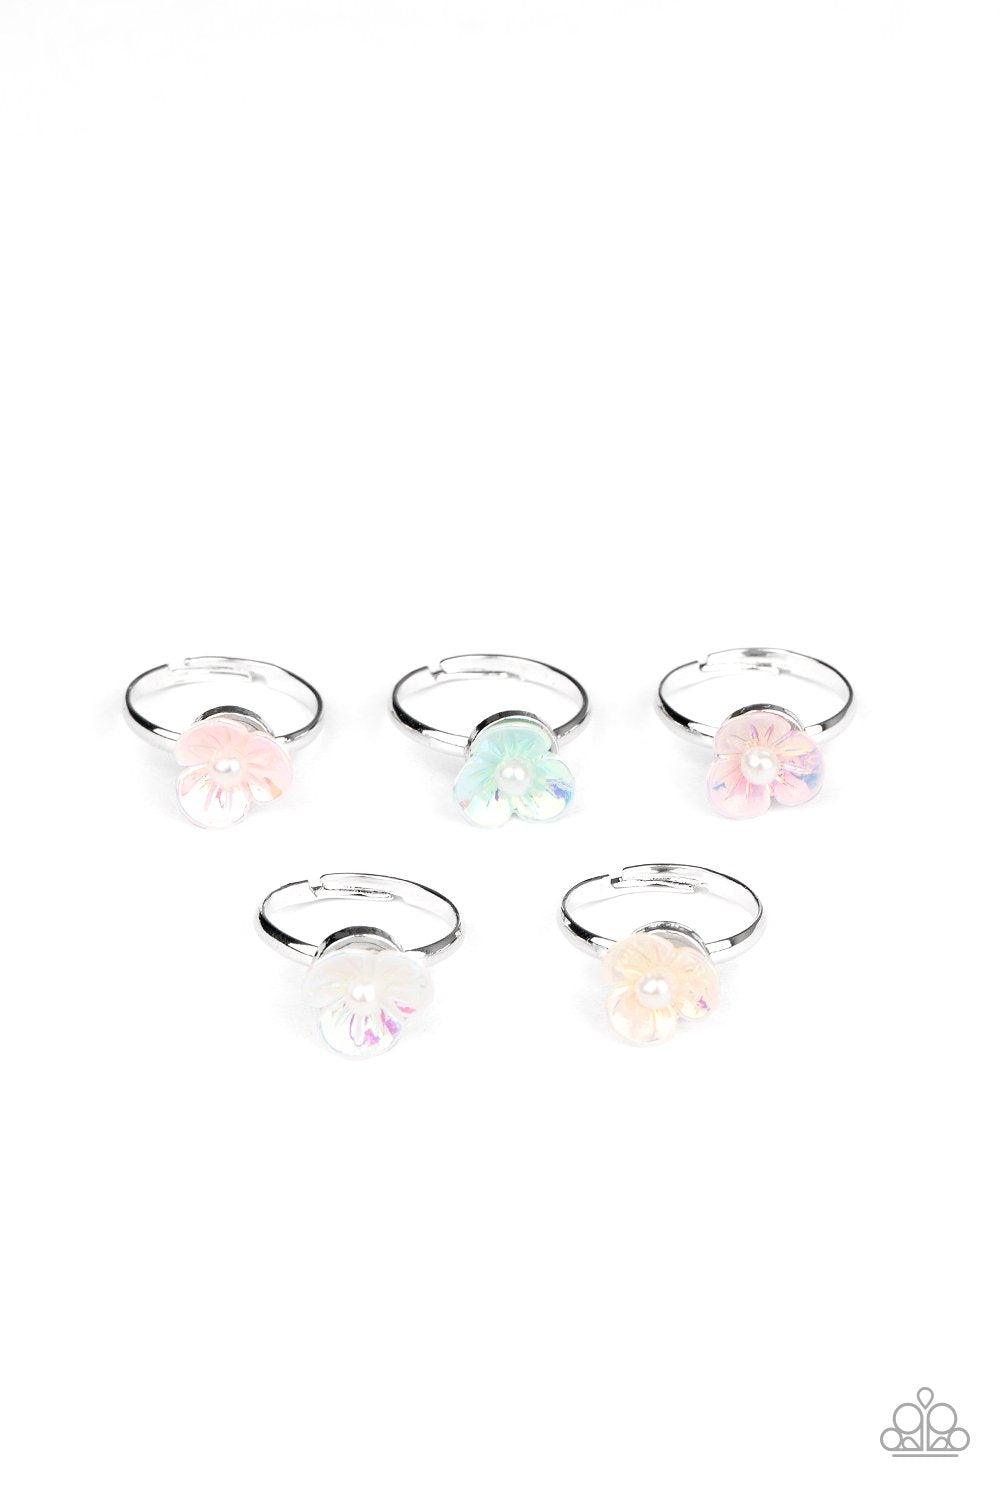 Starlet Shimmer Rings  P4SS-MTXX-241XX - Jewelry by Bretta